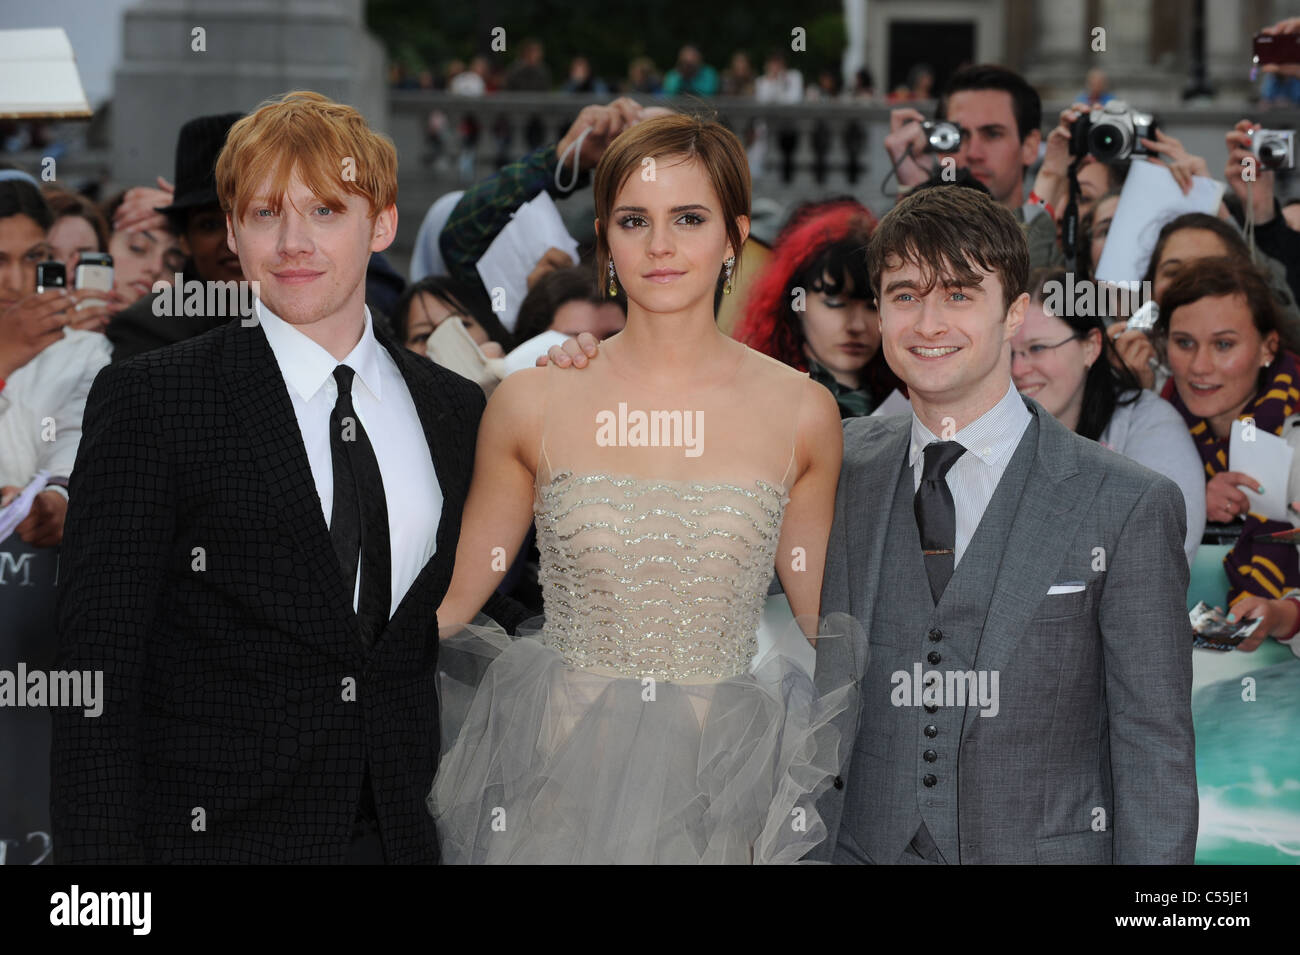 RUPERT GRINT EMMA WATSON & DANIEL RADCLIFFE HARRY POTTER AND THE DEATHLY HALLOWS - PART 2 - WORLD PREMIERE TRAFALGAR SQUARE LO Stock Photo